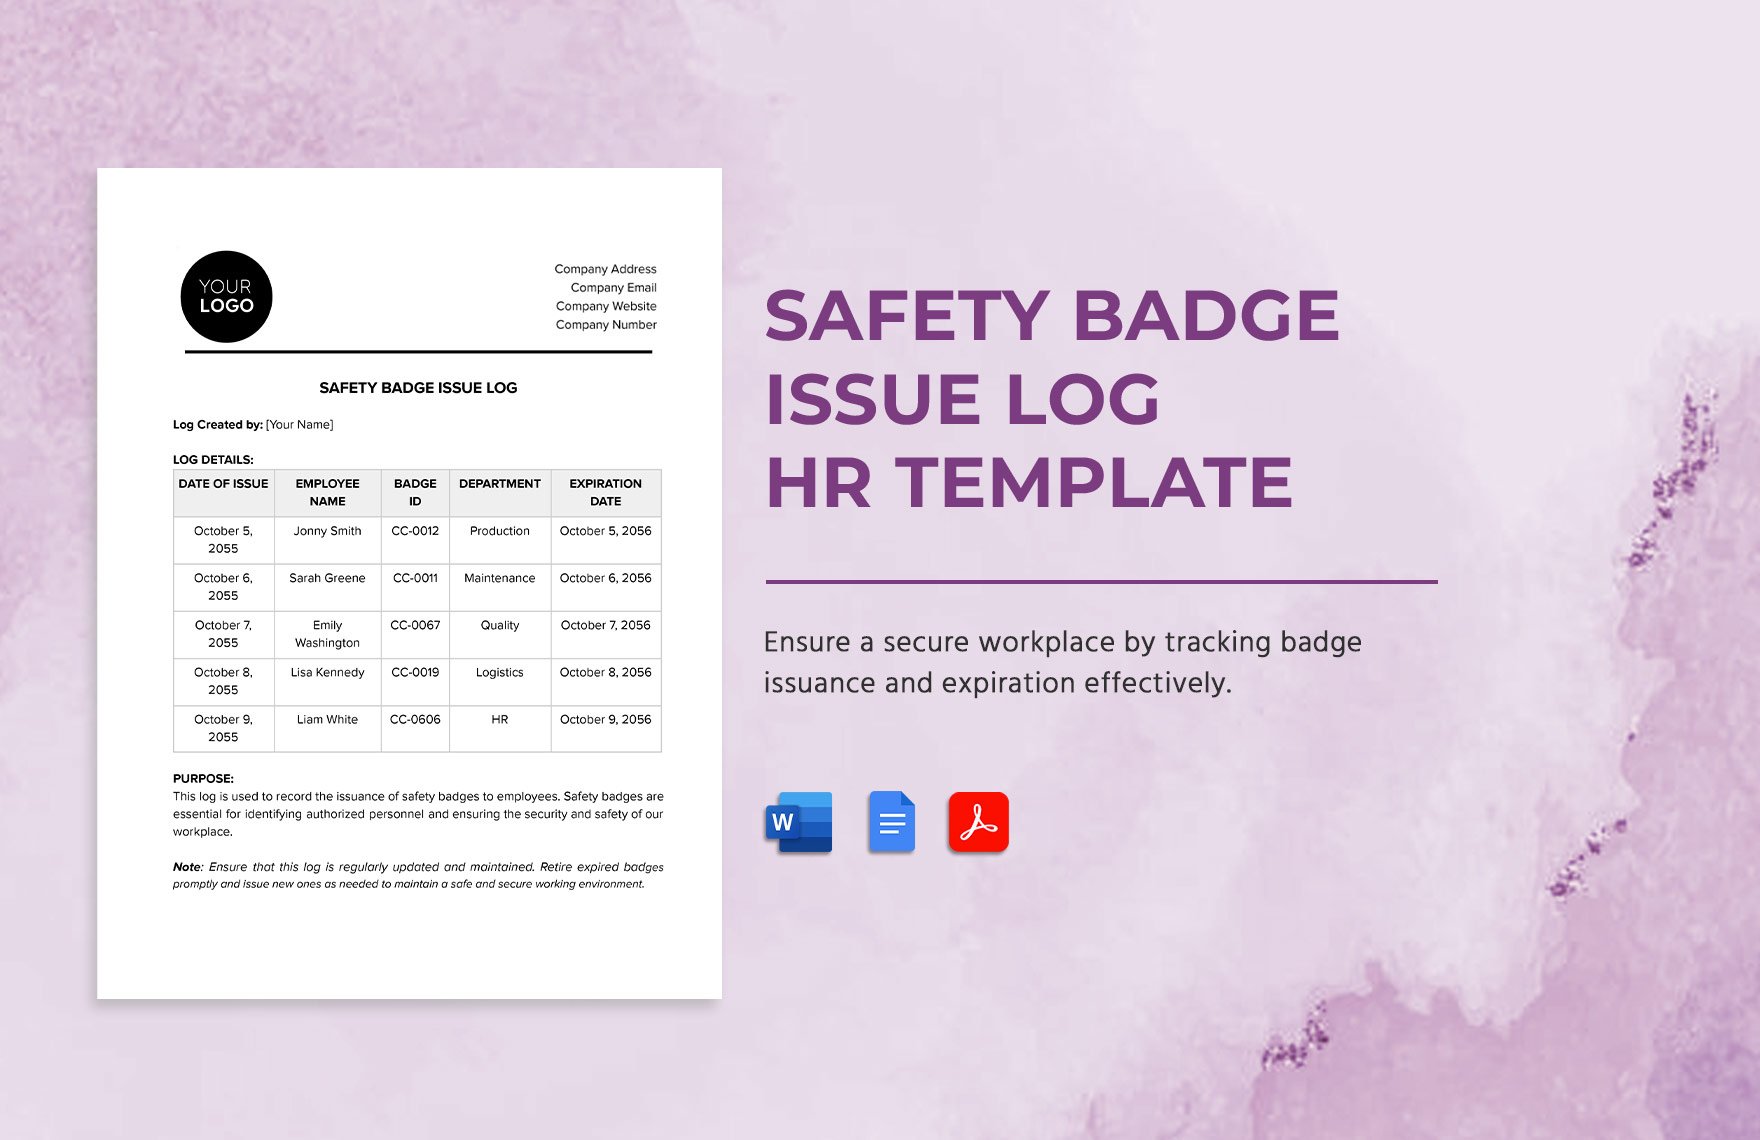 Safety Badge Issue Log HR Template